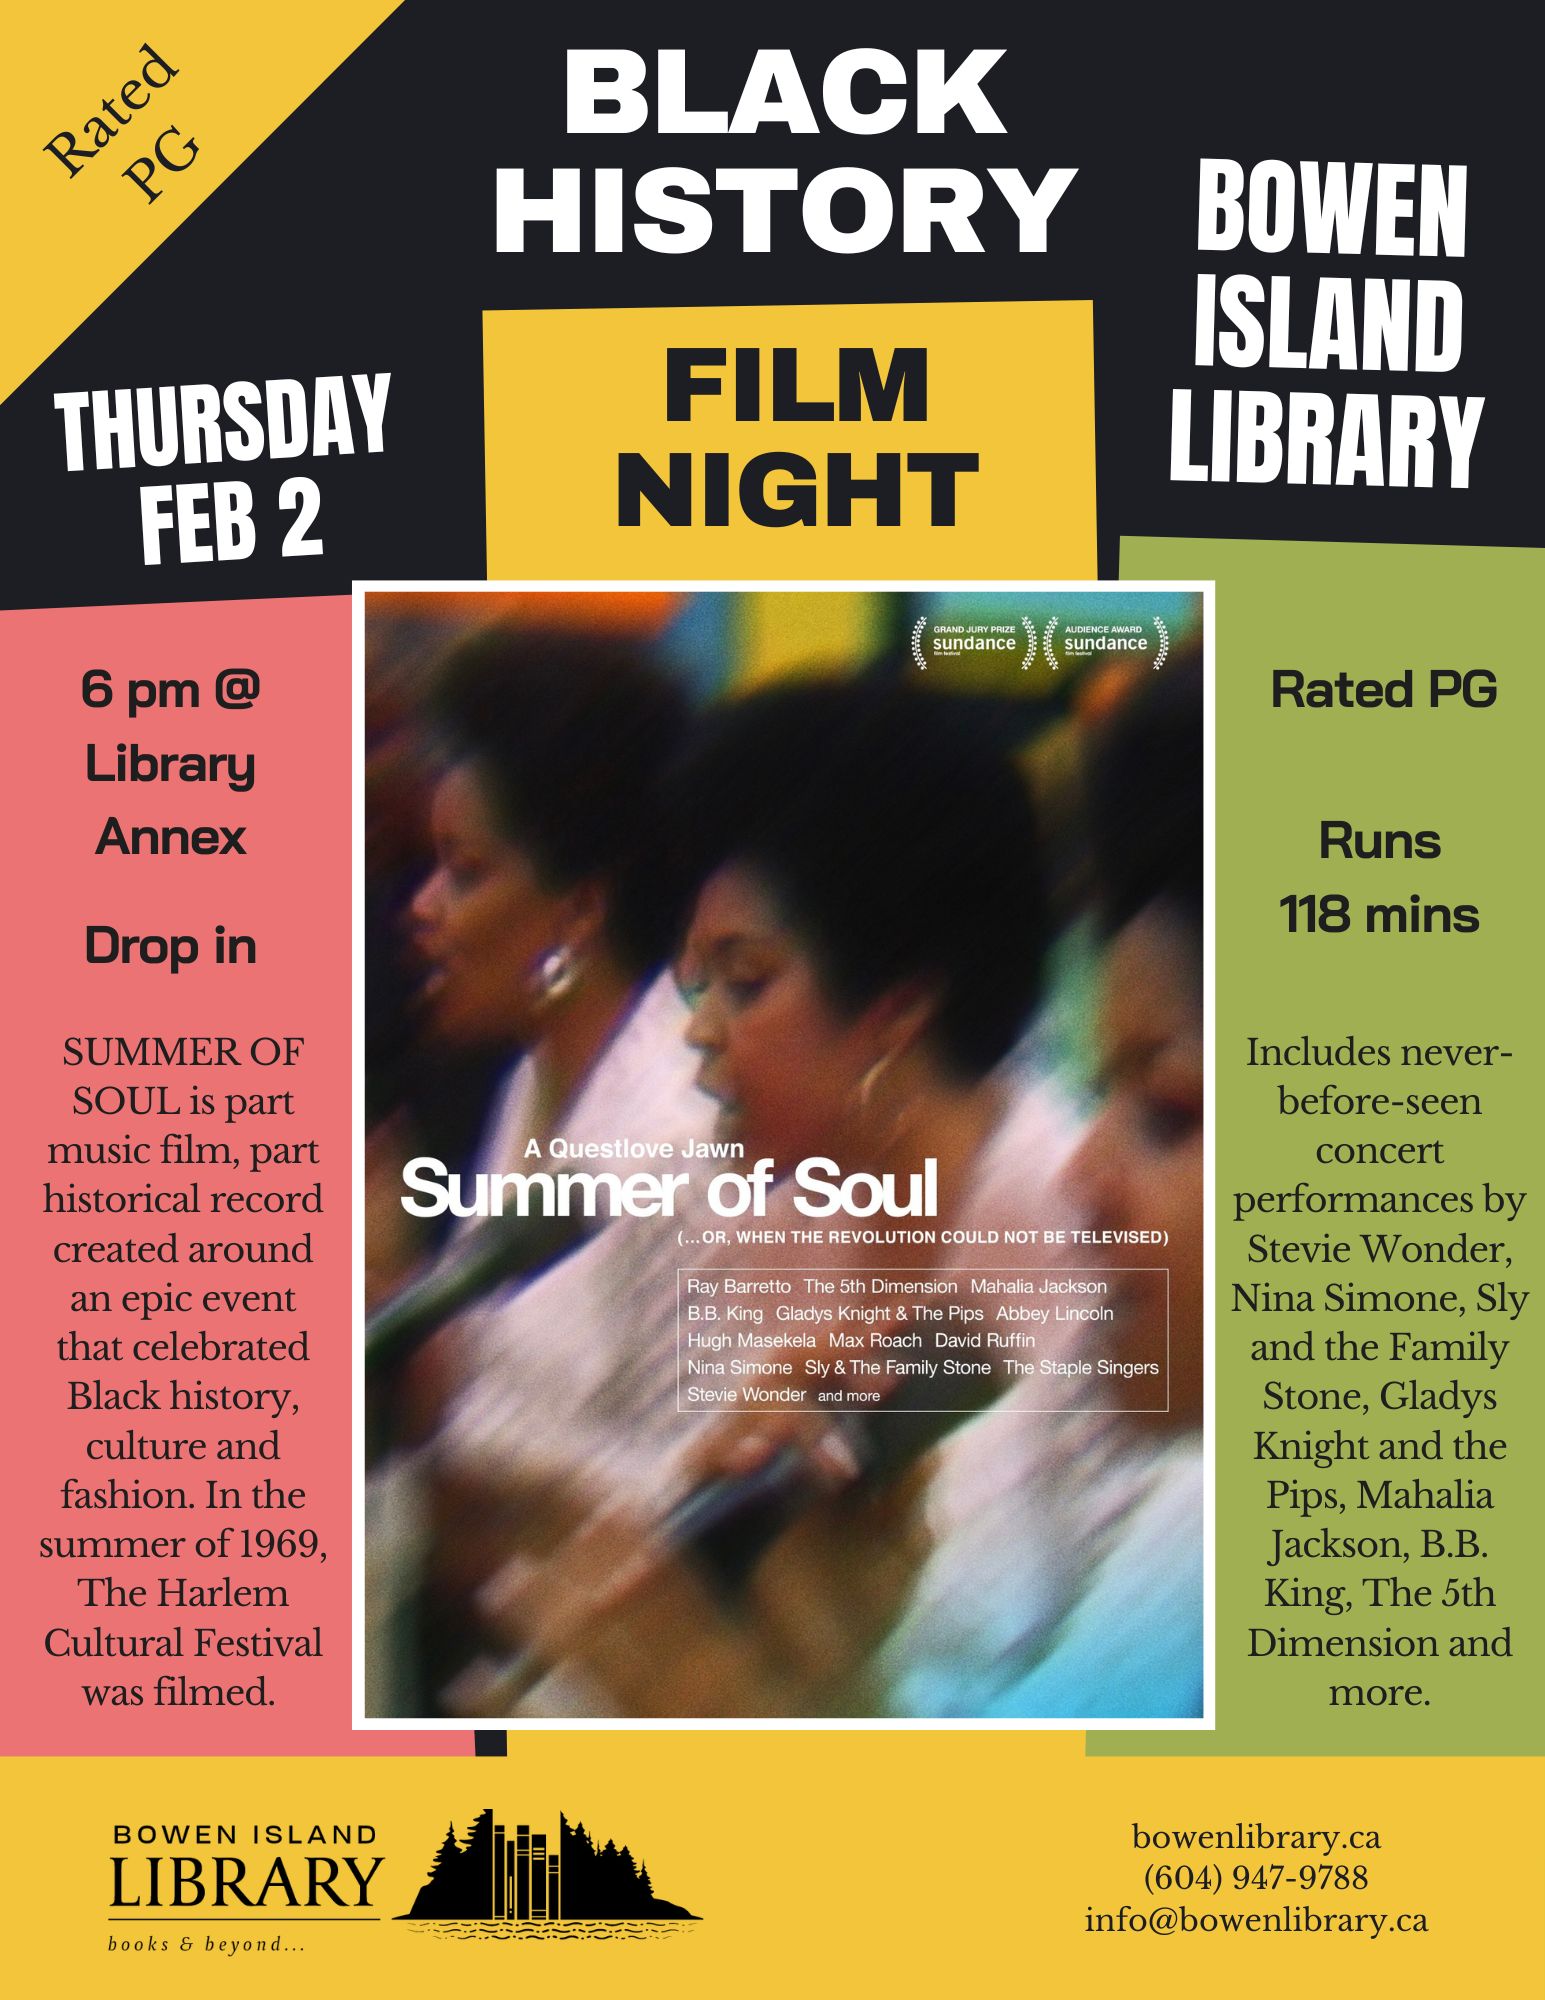 Image description: poster for Back History Film Night at Bowen Library, with blocks of colour in yellow, red, and green, and movie poster image for “Summer of Soul” directed by Questlove.